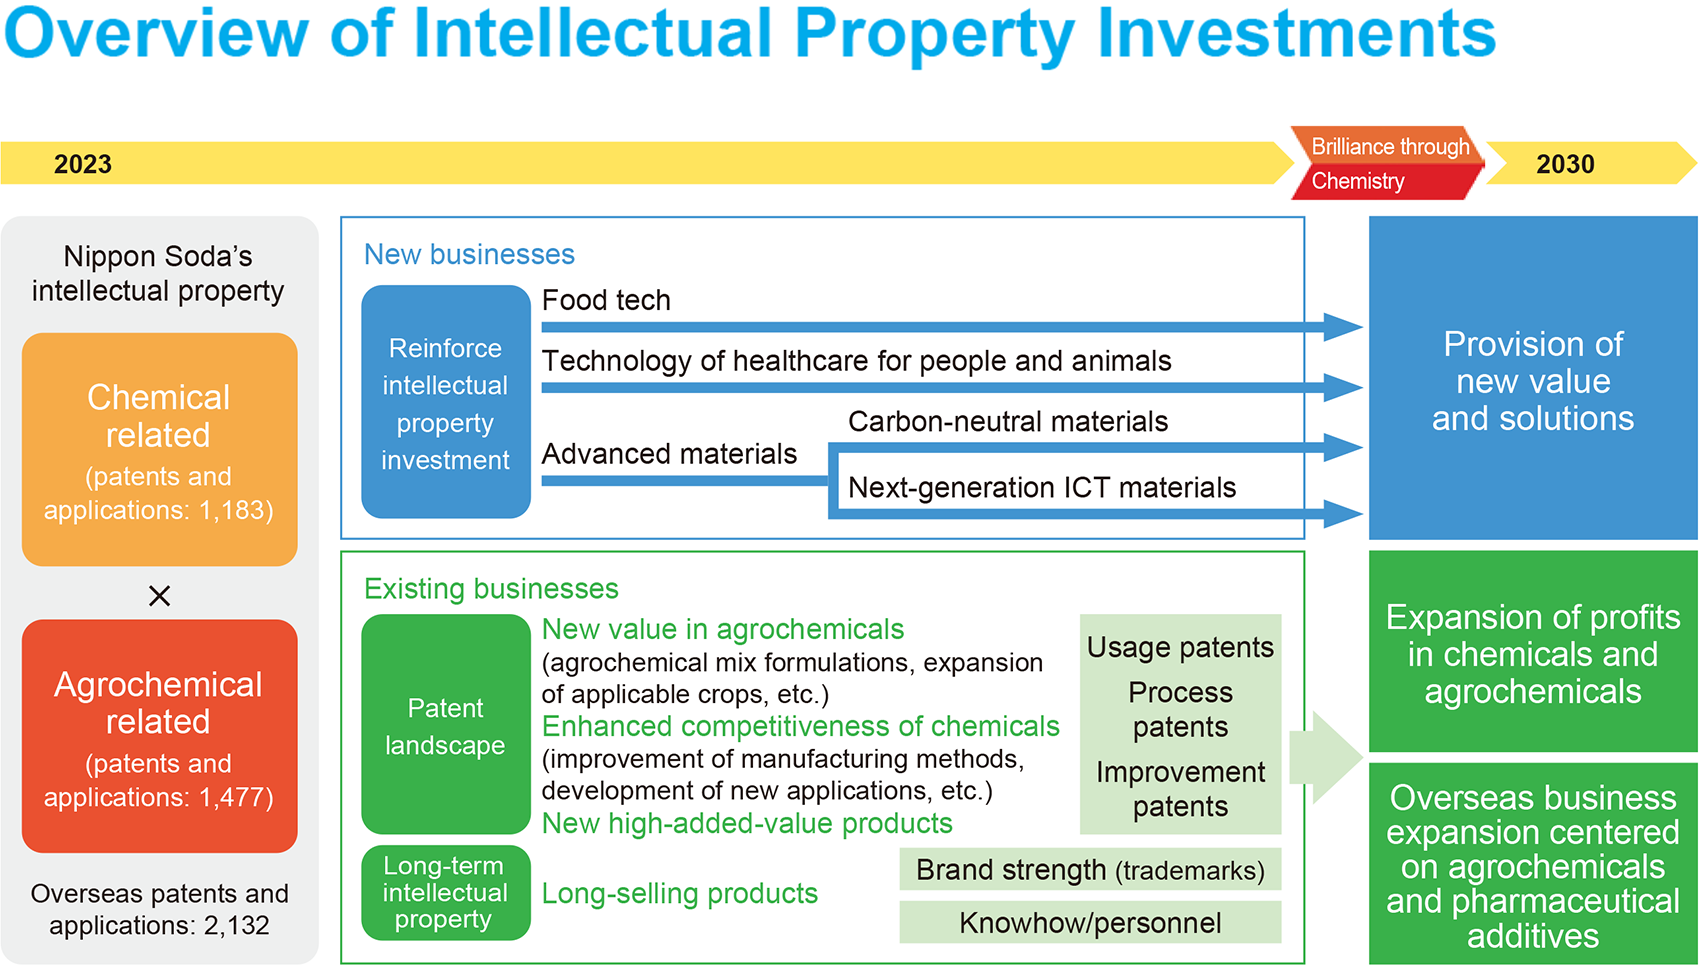 Overview of Intellectual Property Investments